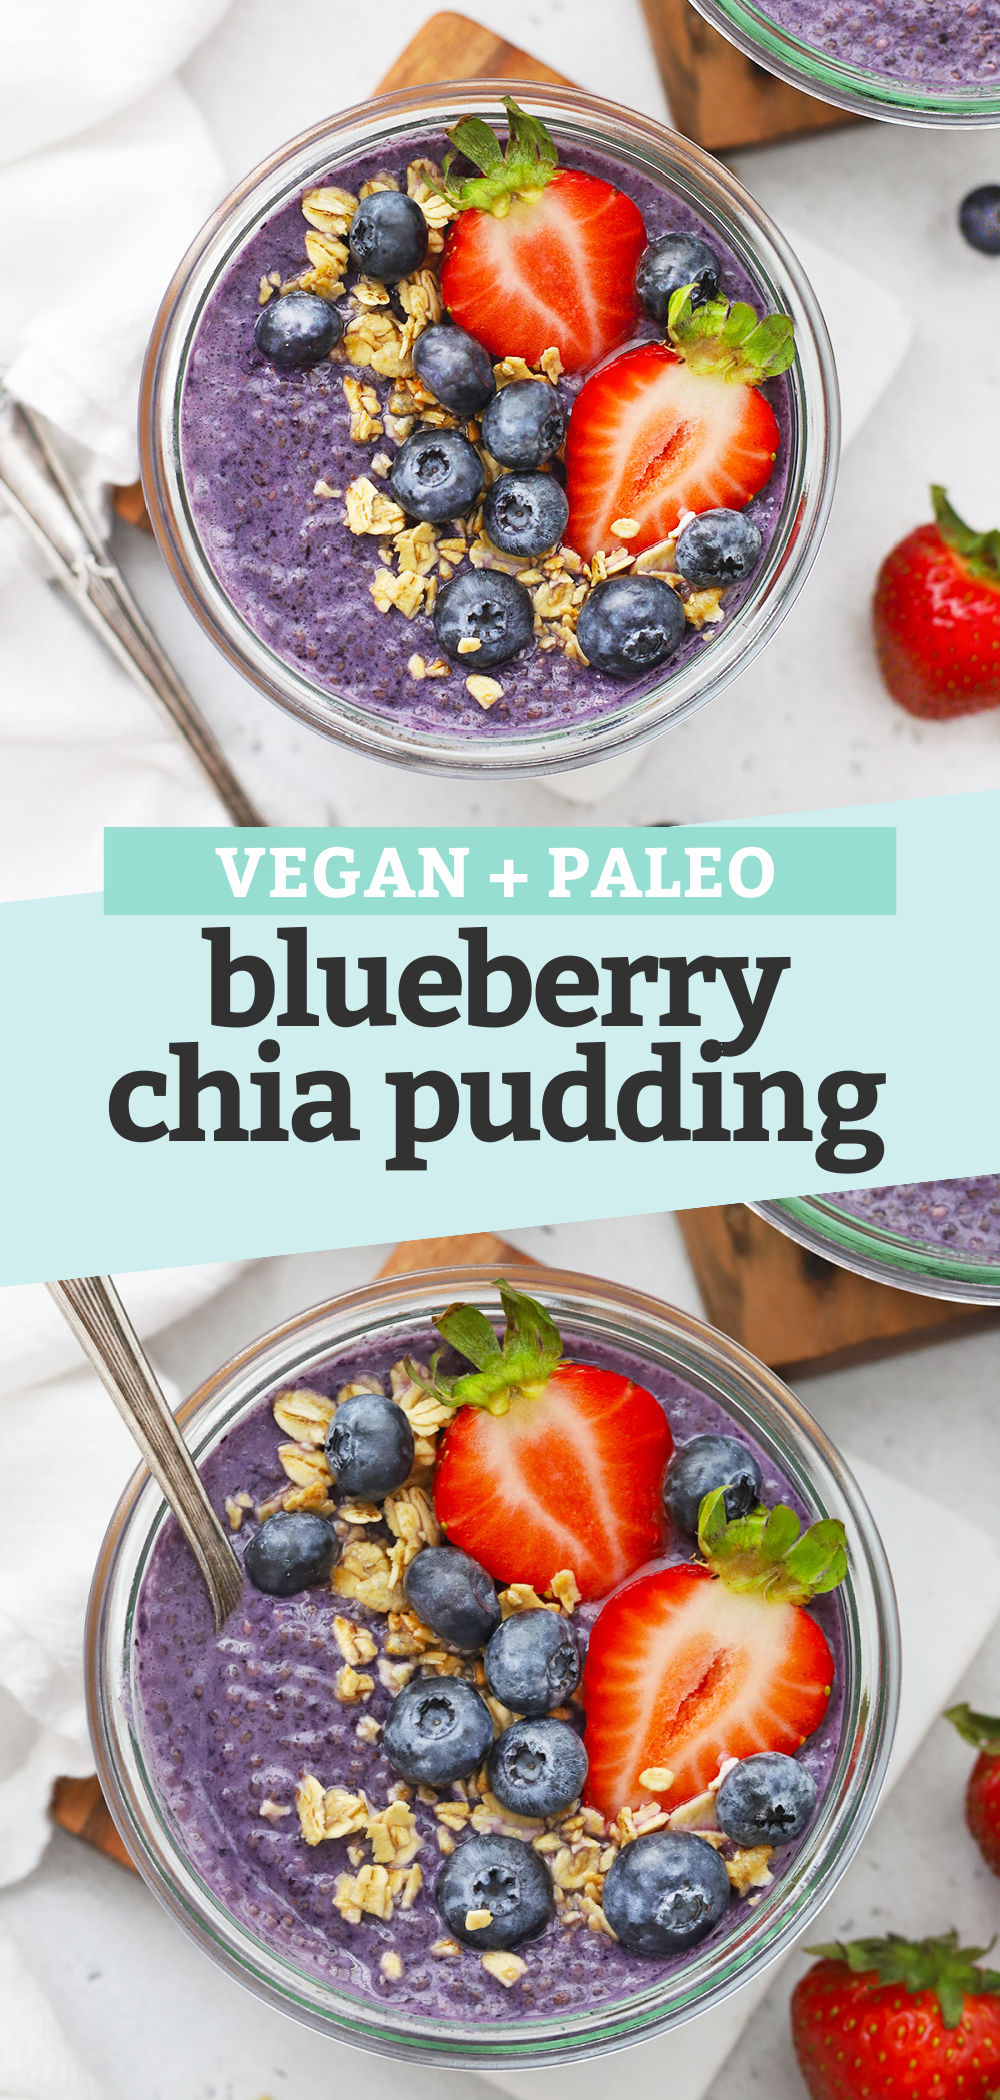 Collage of images of Blueberry Chia Pudding with text overlay that reads "Vegan + Paleo Blueberry Chia Pudding"